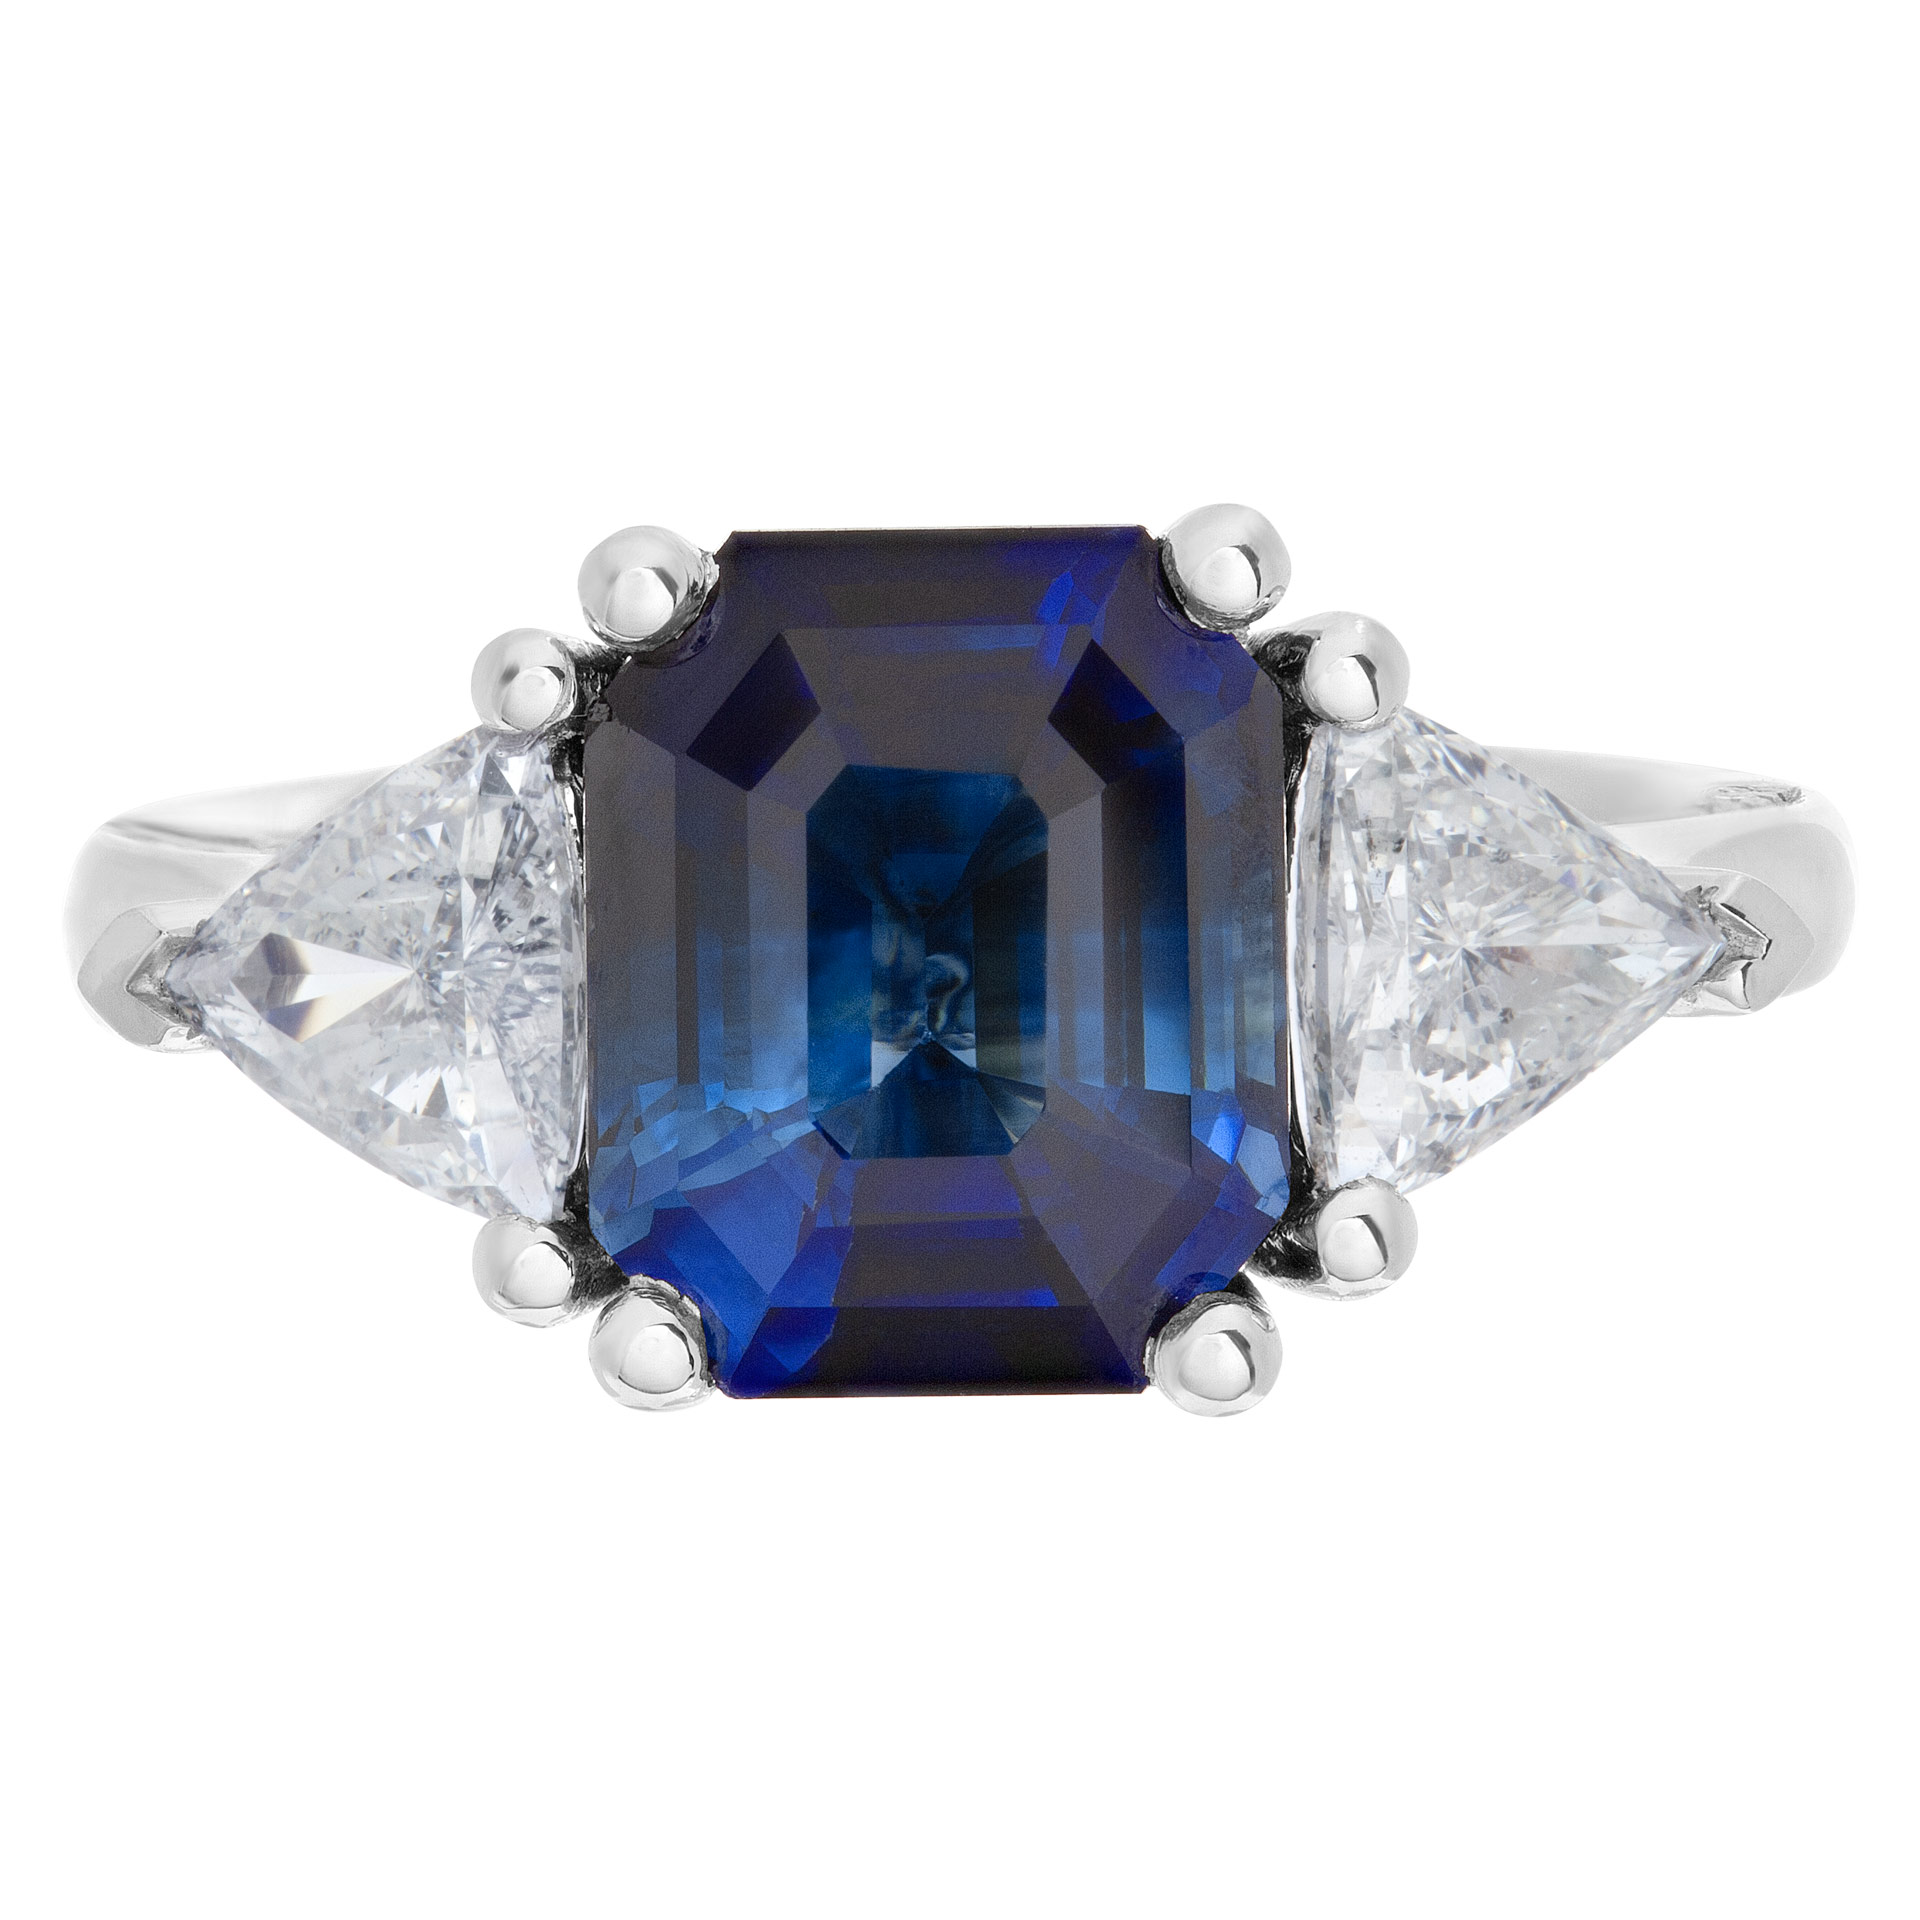 Stunning blue sapphire and diamond ring in platinum with 4.49 carats in central sapphire and 1.01 carats in side triangle cut diamonds image 1